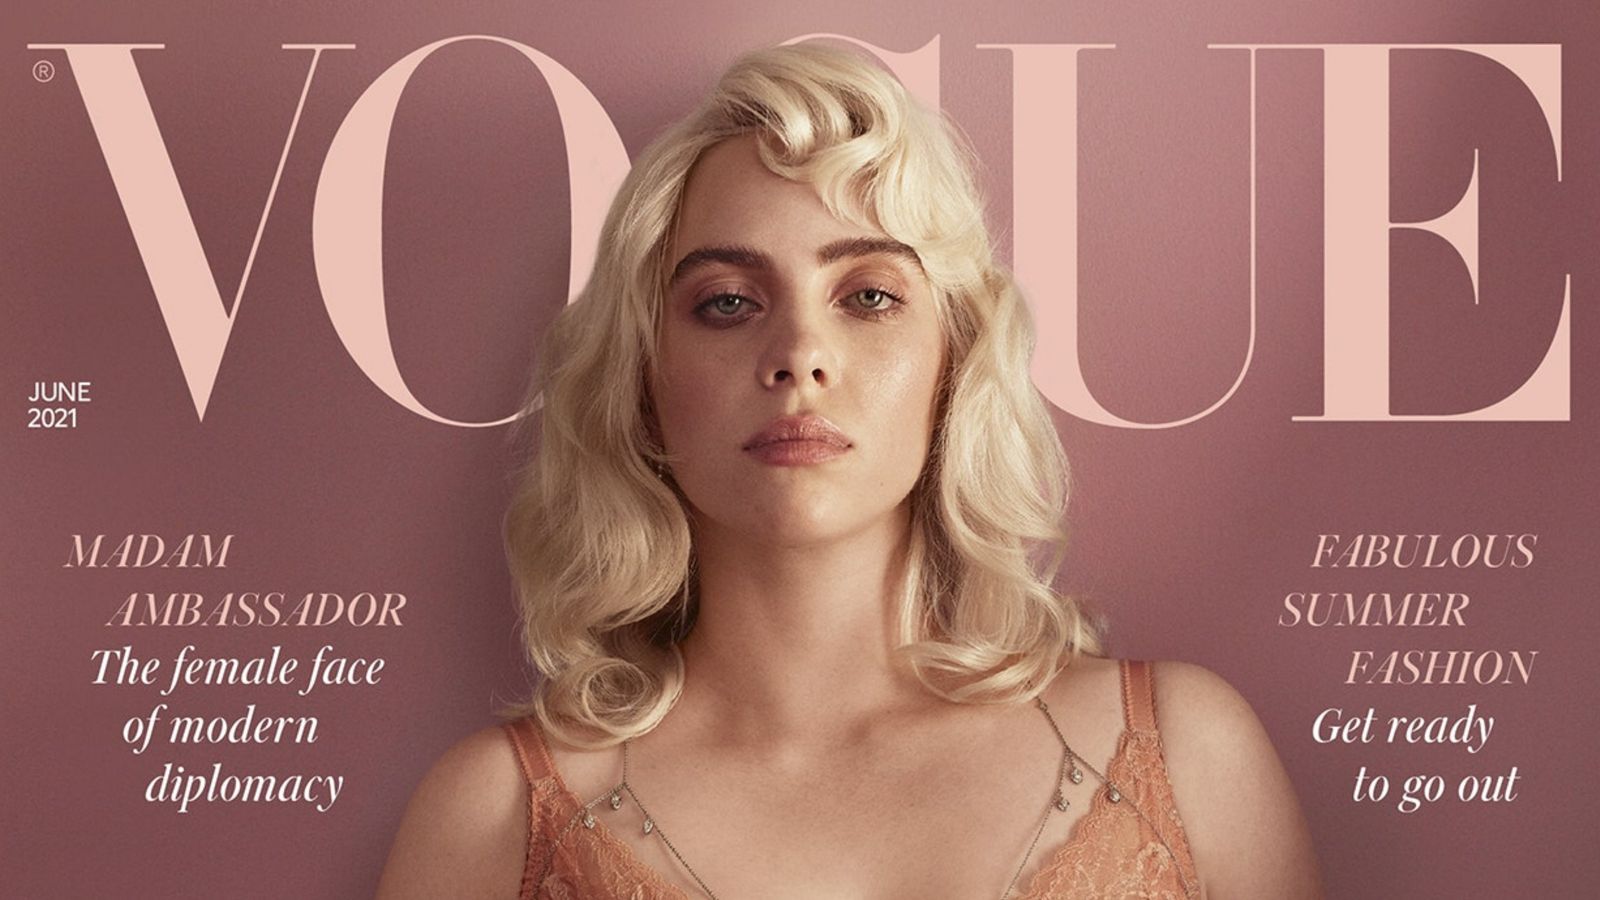 Singer Billie Eilish in a pink corset on the cover of Vogue magazine